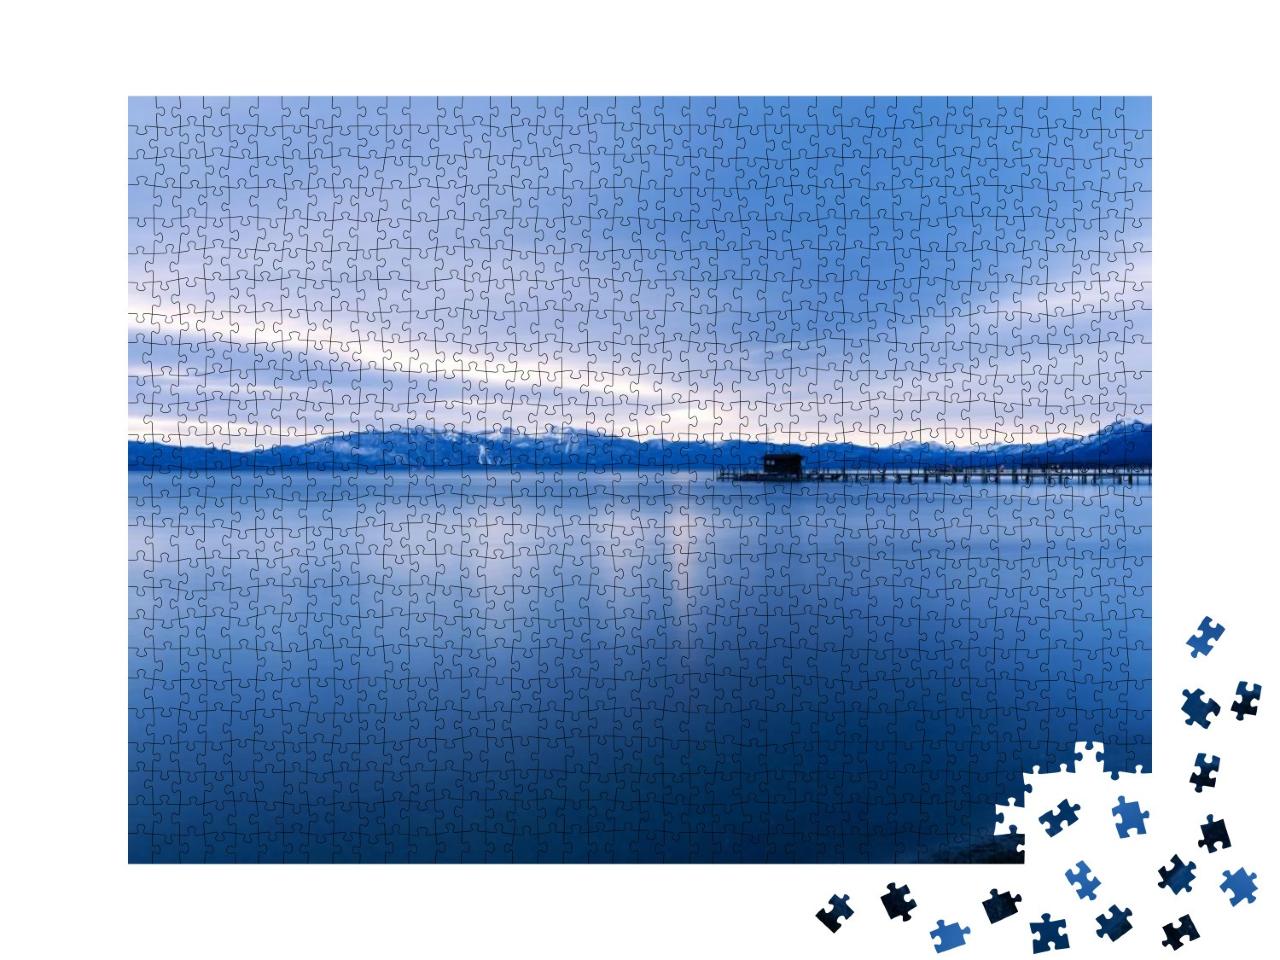 Lake Tahoe Winter Landscape Photograph At Sunrise... Jigsaw Puzzle with 1000 pieces